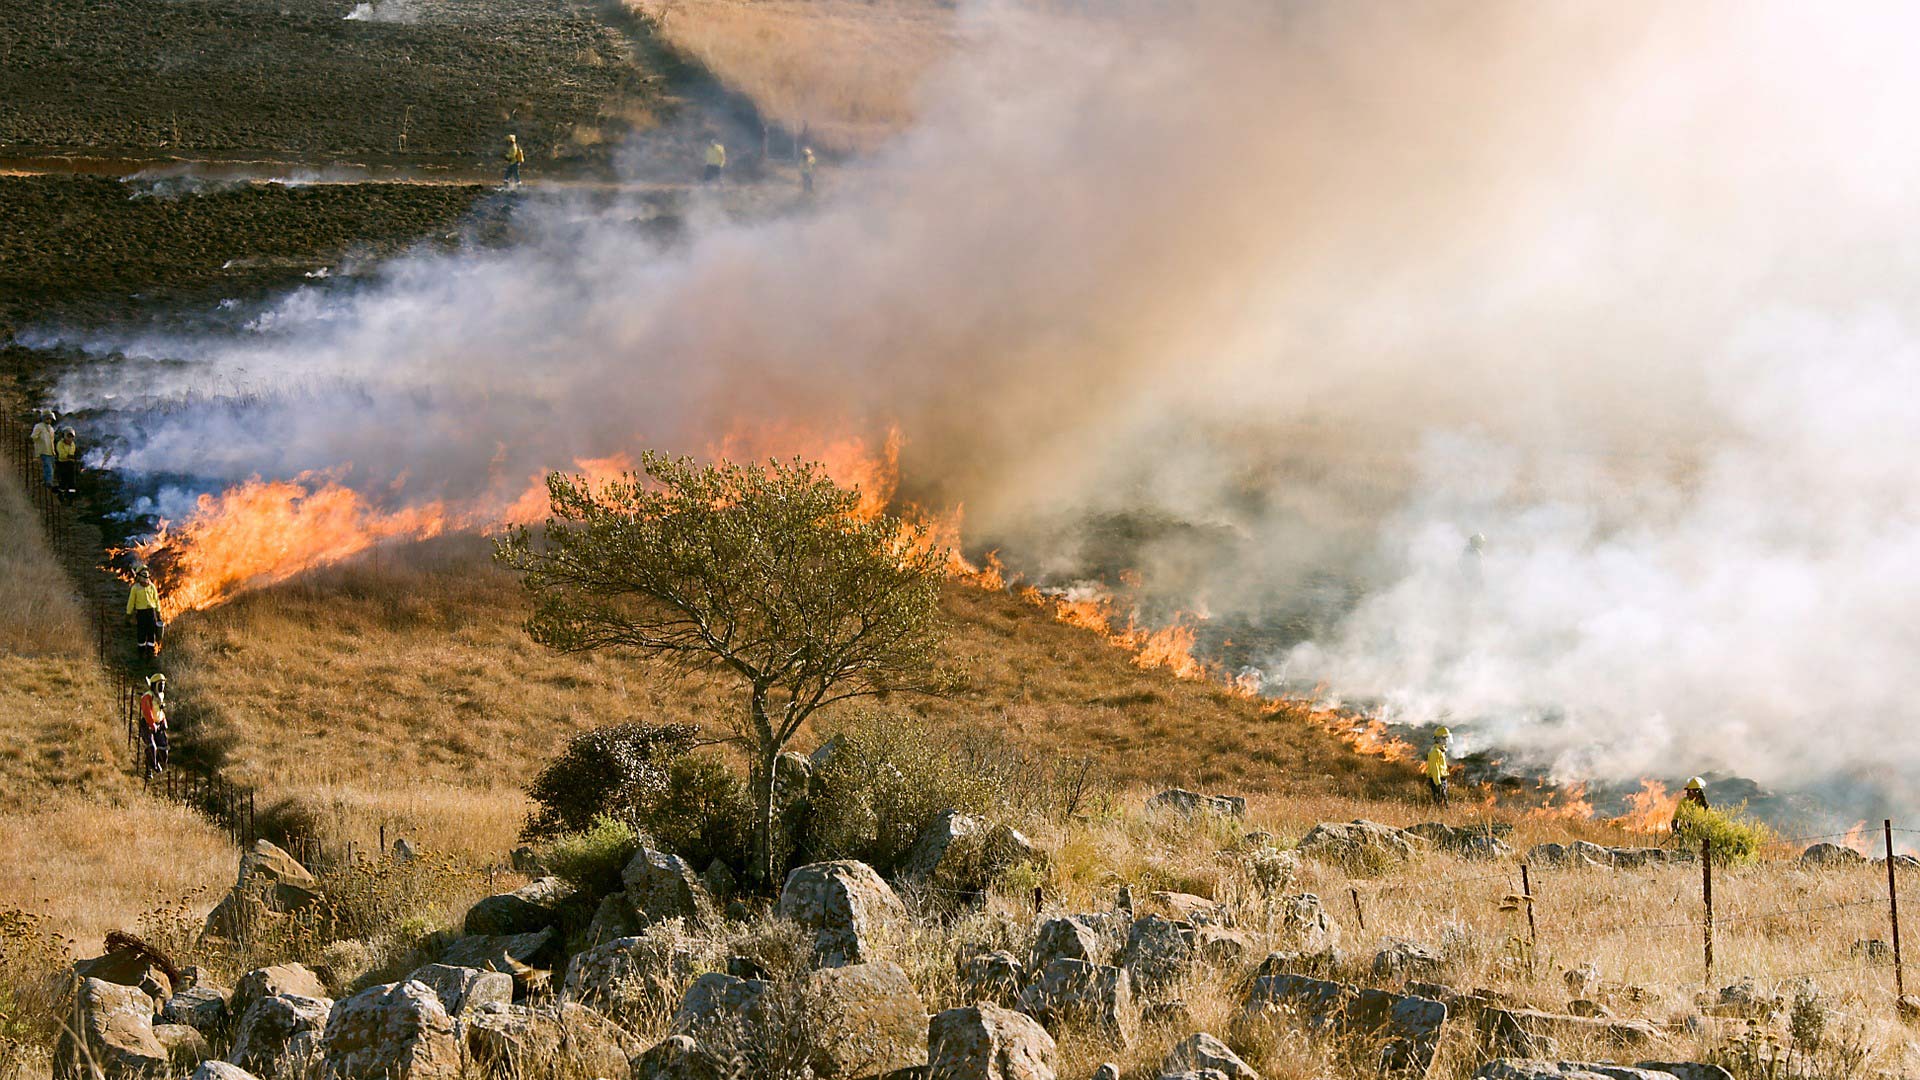 A controlled burn is monitored by firefighters.